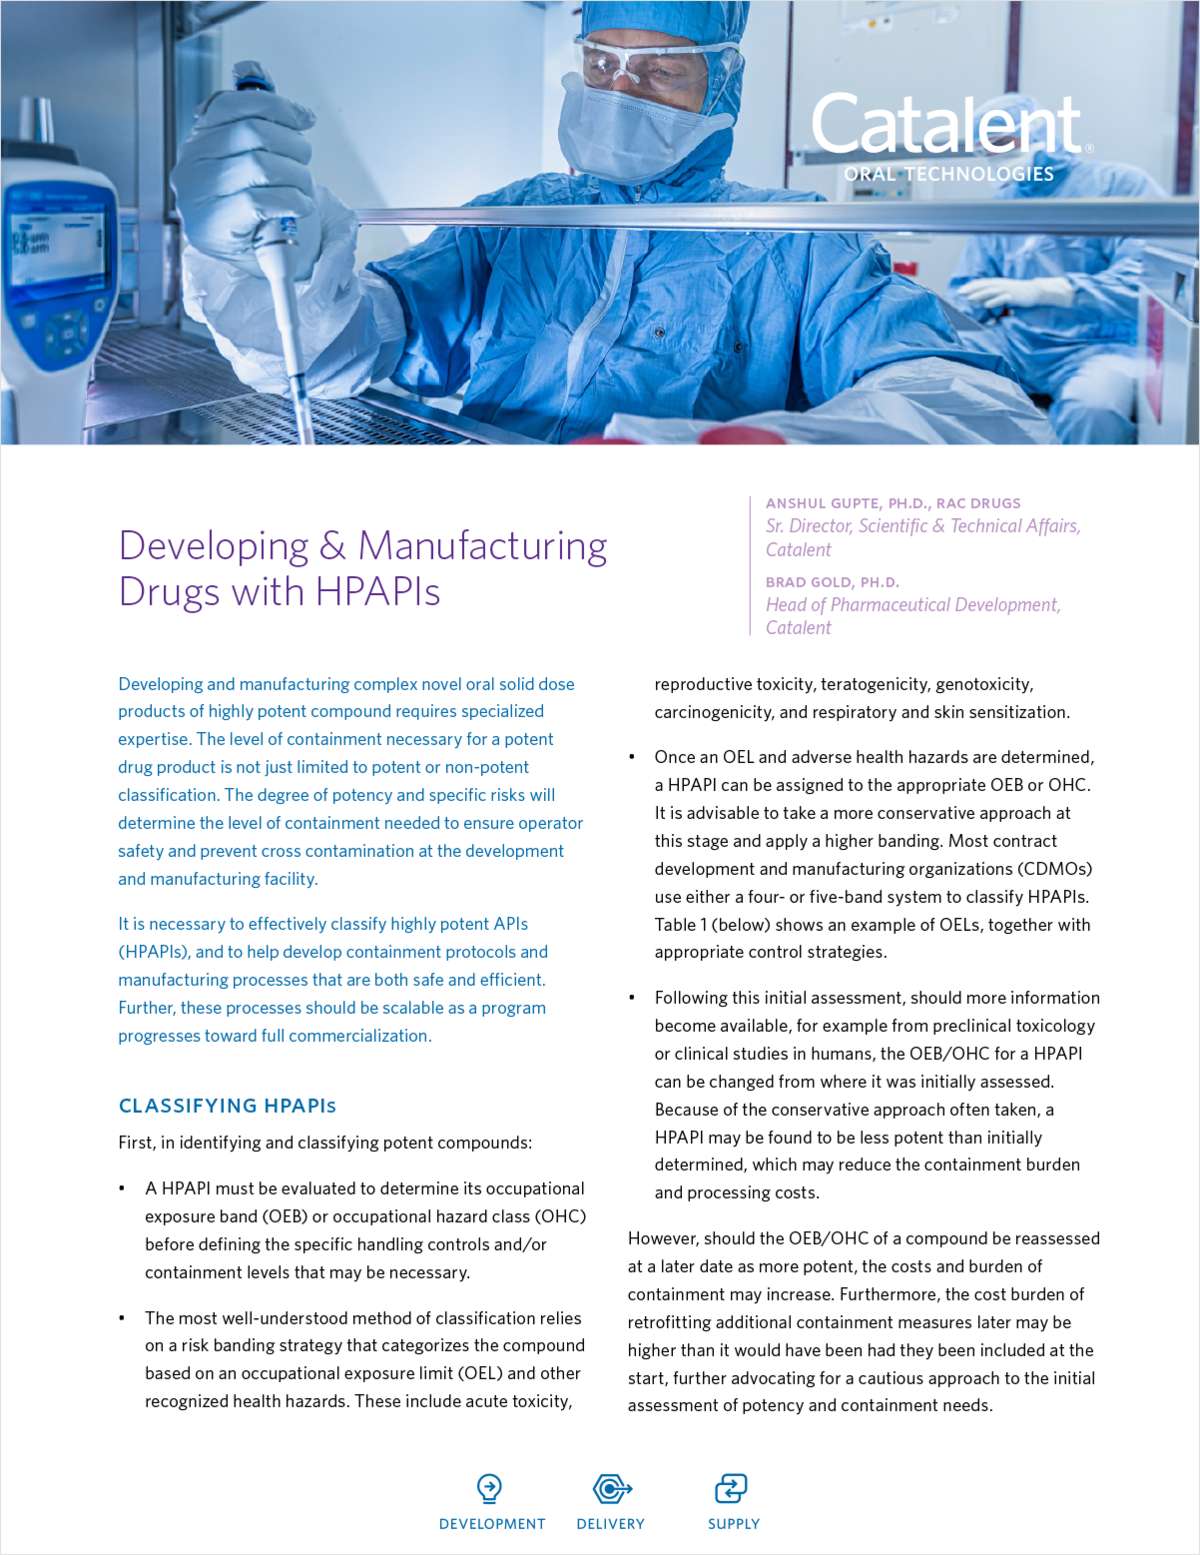 Developing and Manufacturing Drugs with HPAPIs